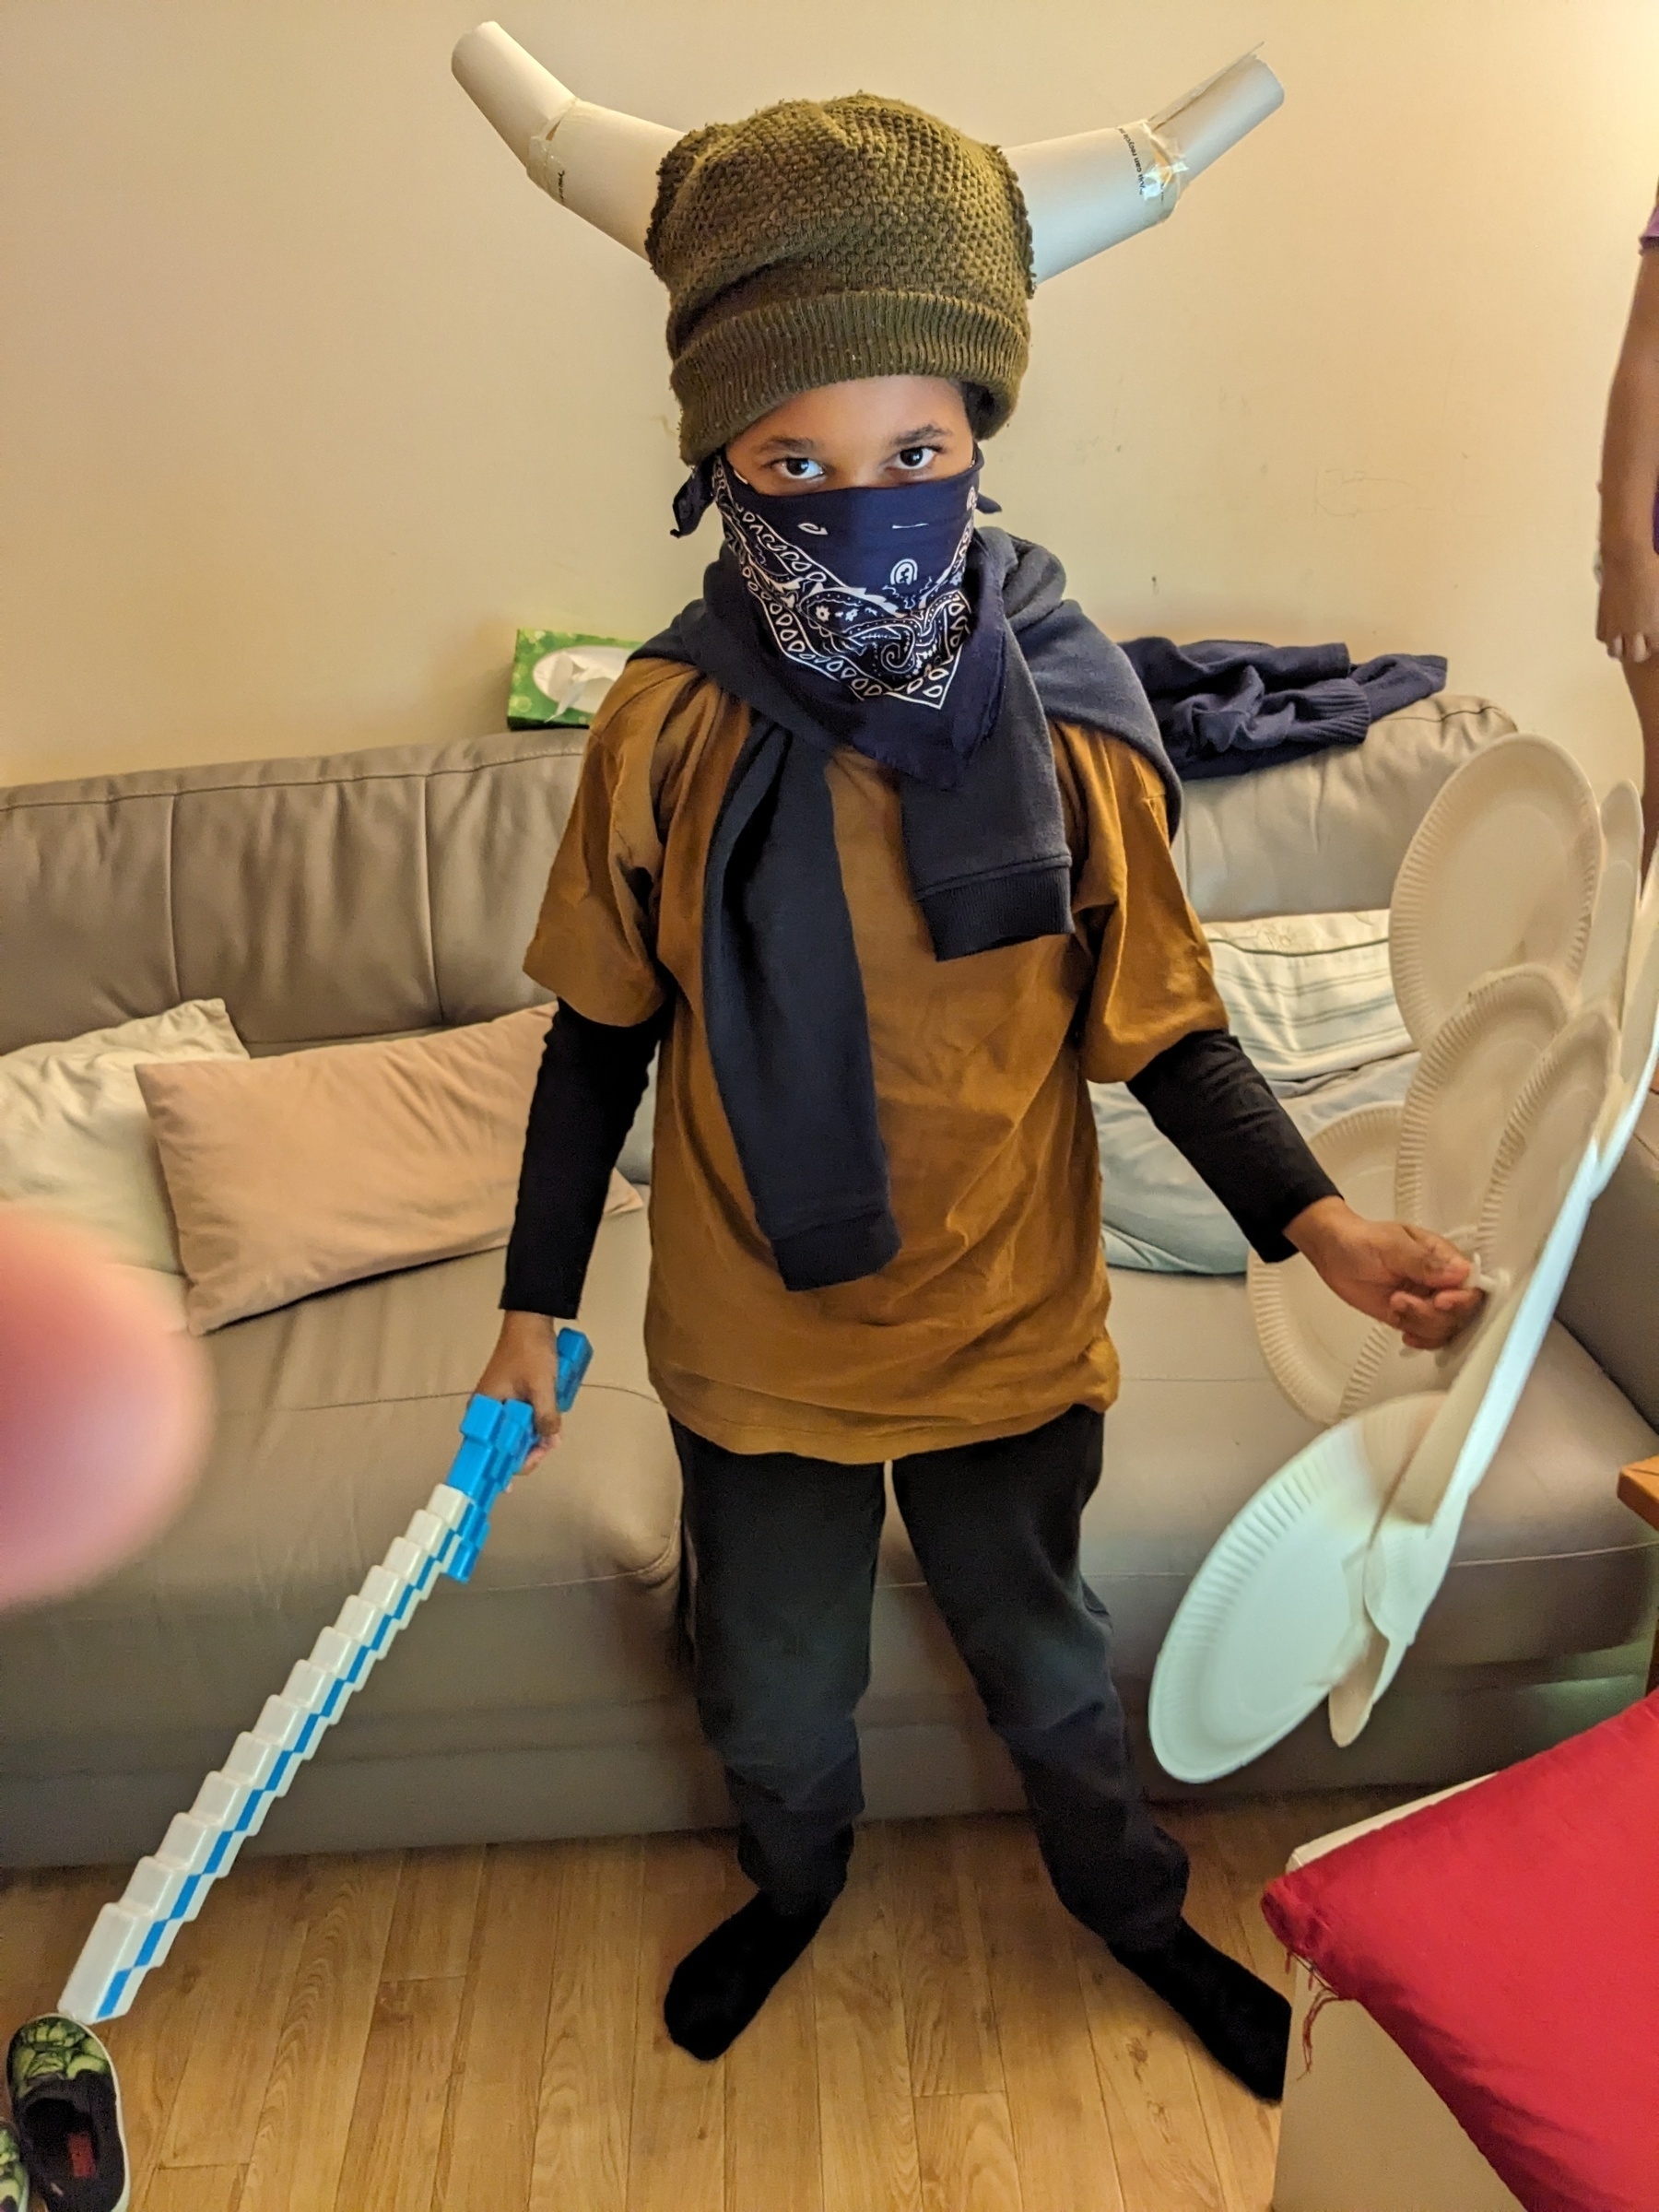 Nine year old dressed up as a Viking